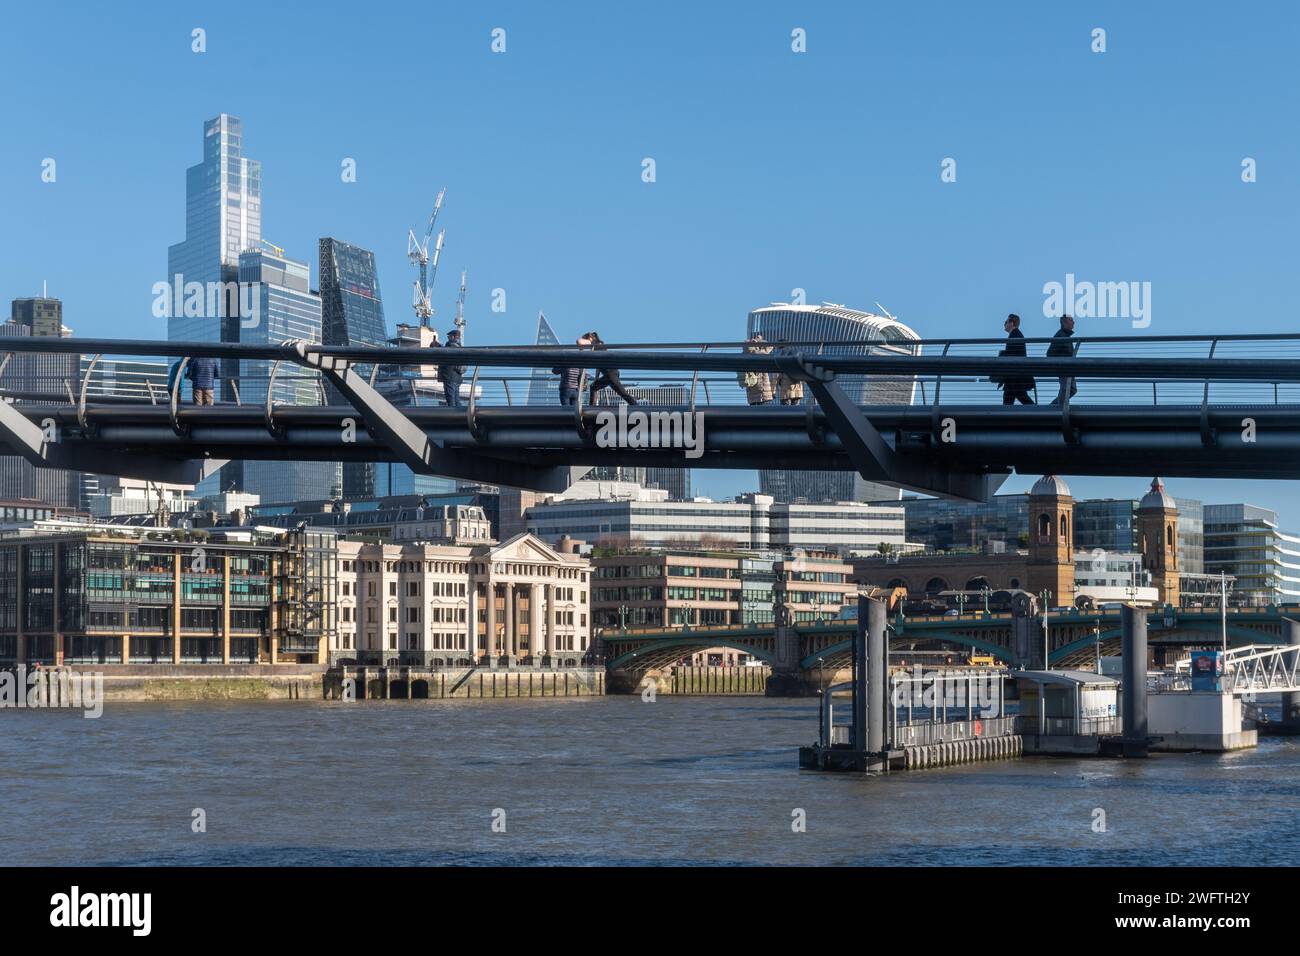 People walking across the Millennium Bridge over the River Thames in London, England, UK, on a sunny winter day Stock Photo